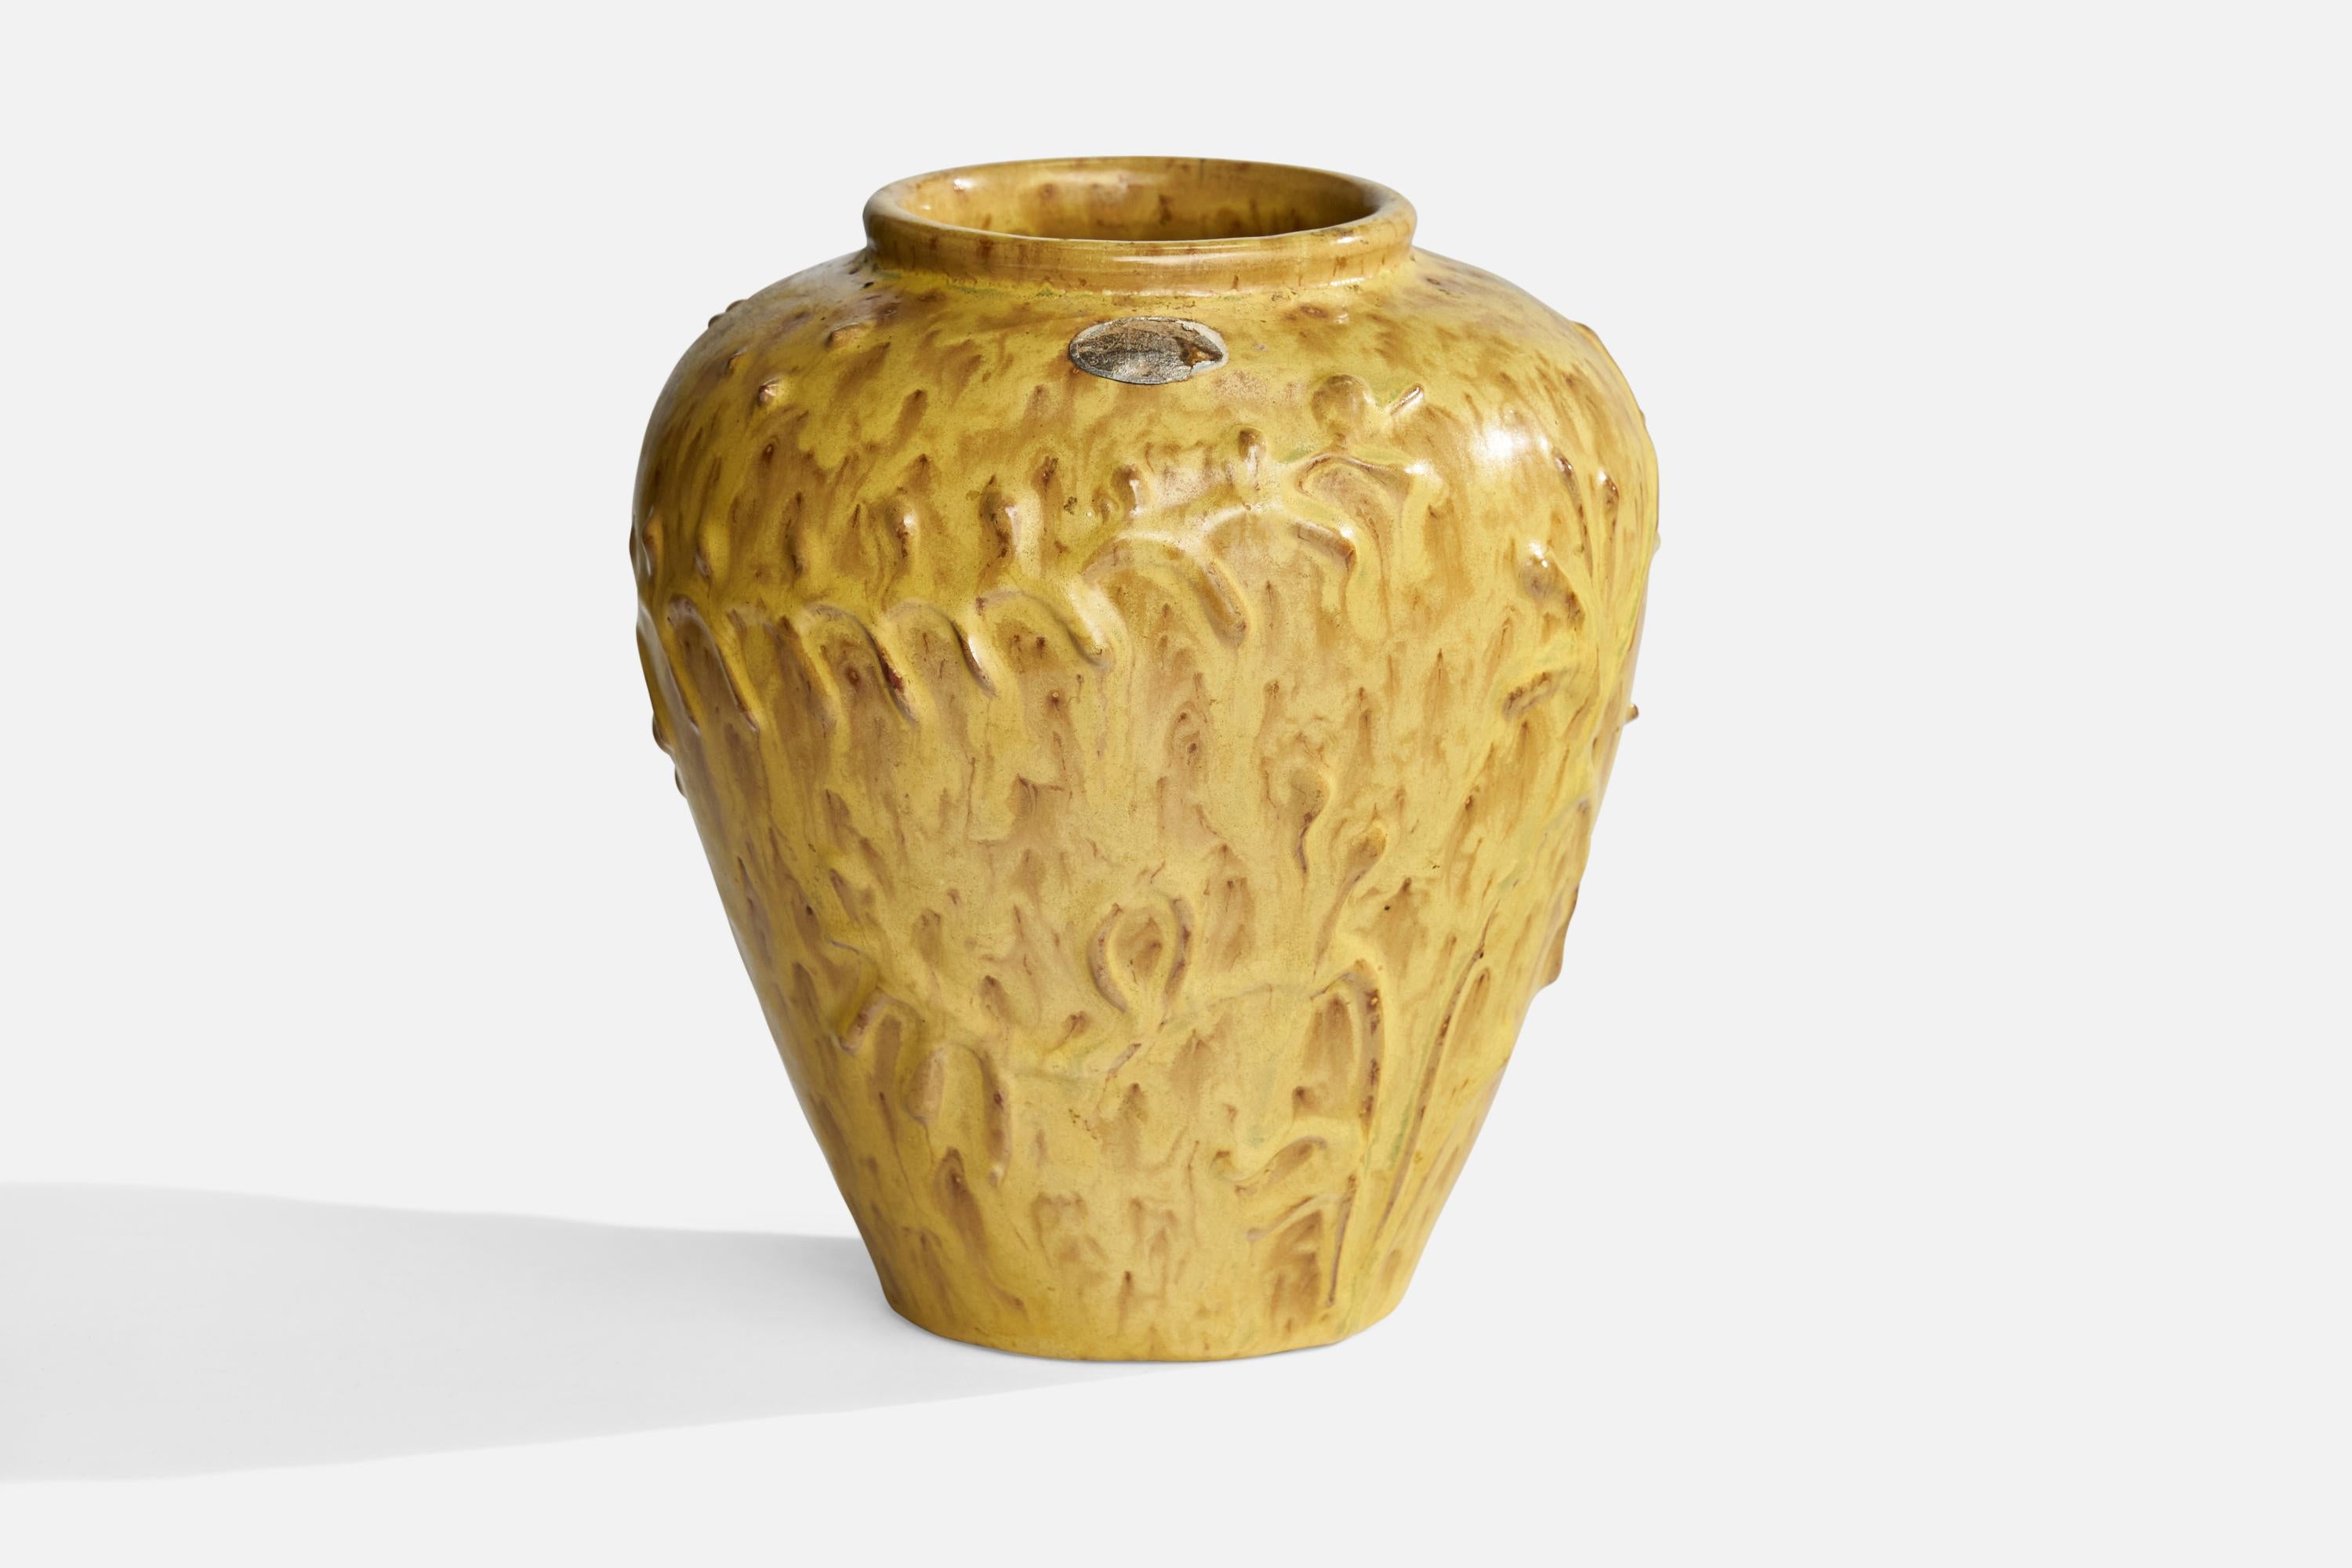 A yellow-glazed ceramic vase designed and produced by Nittsjö, Sweden, 1930s.